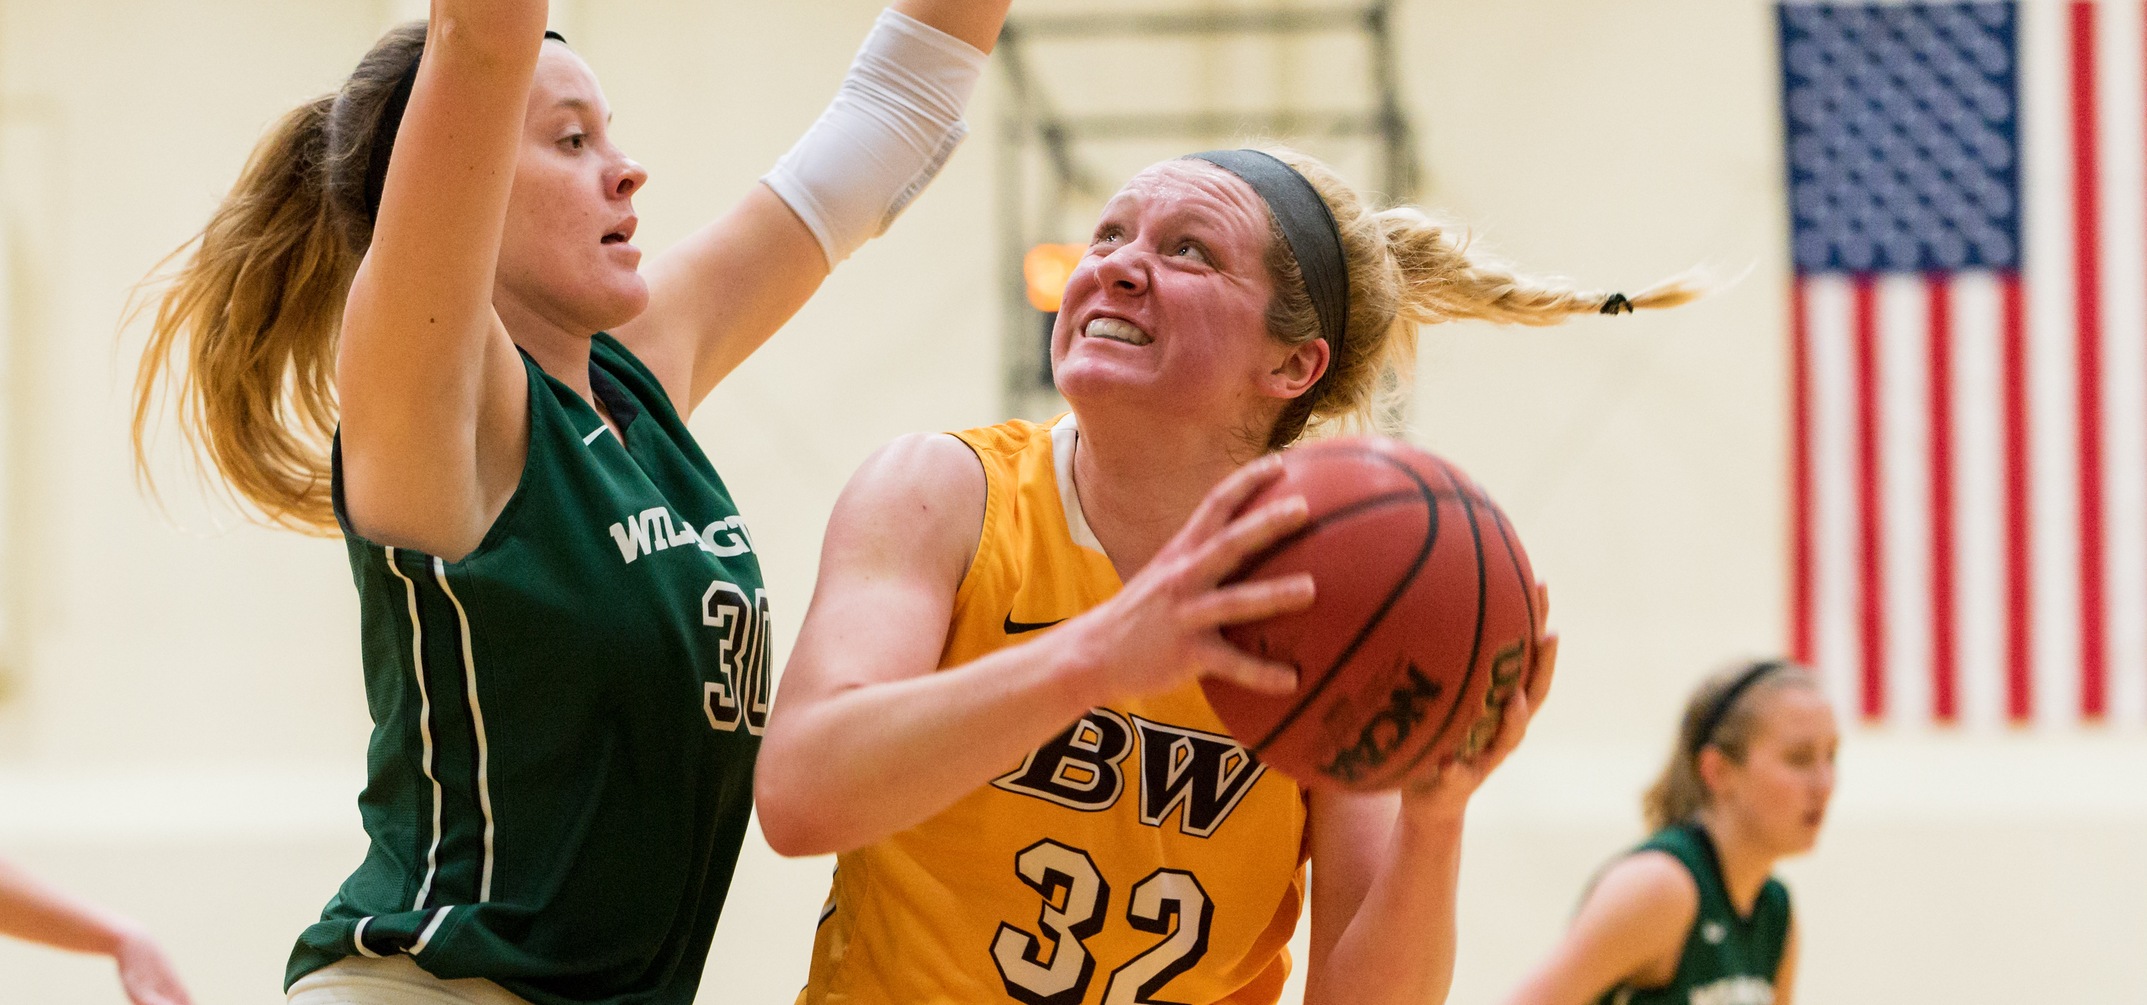 Freshman forward Lilly Edwards scored 20 points off the bench in BW's win over Wilmington (Photo courtesy of Jesse Kucewicz)